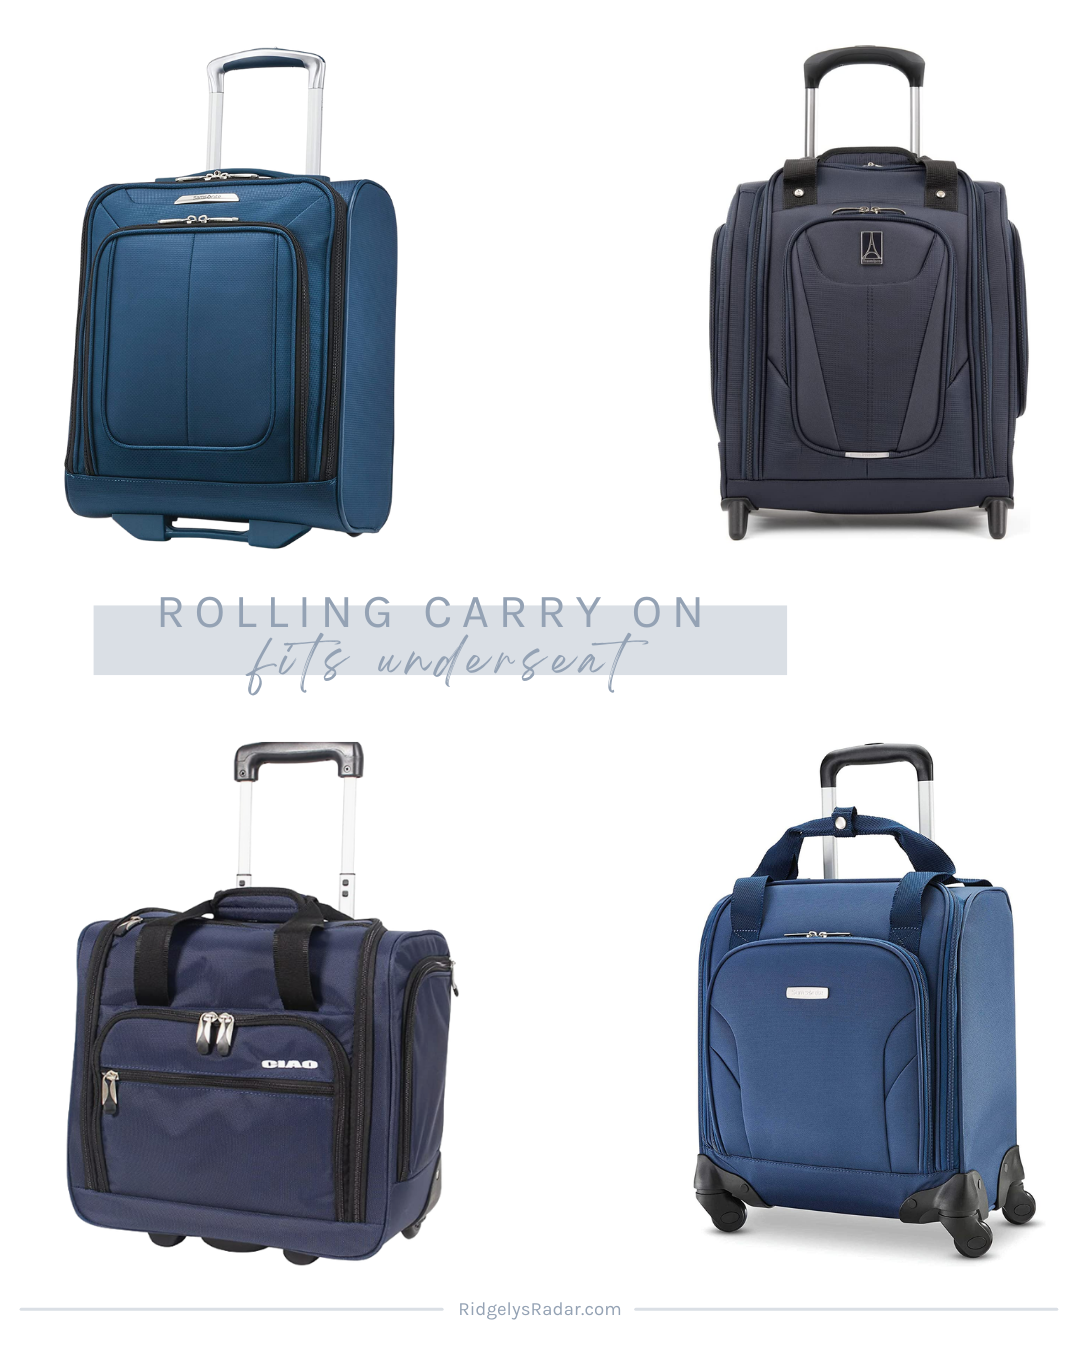 No more carrying heavy totes through airports, get one of these rolling carry on luggage that fits under the seat.